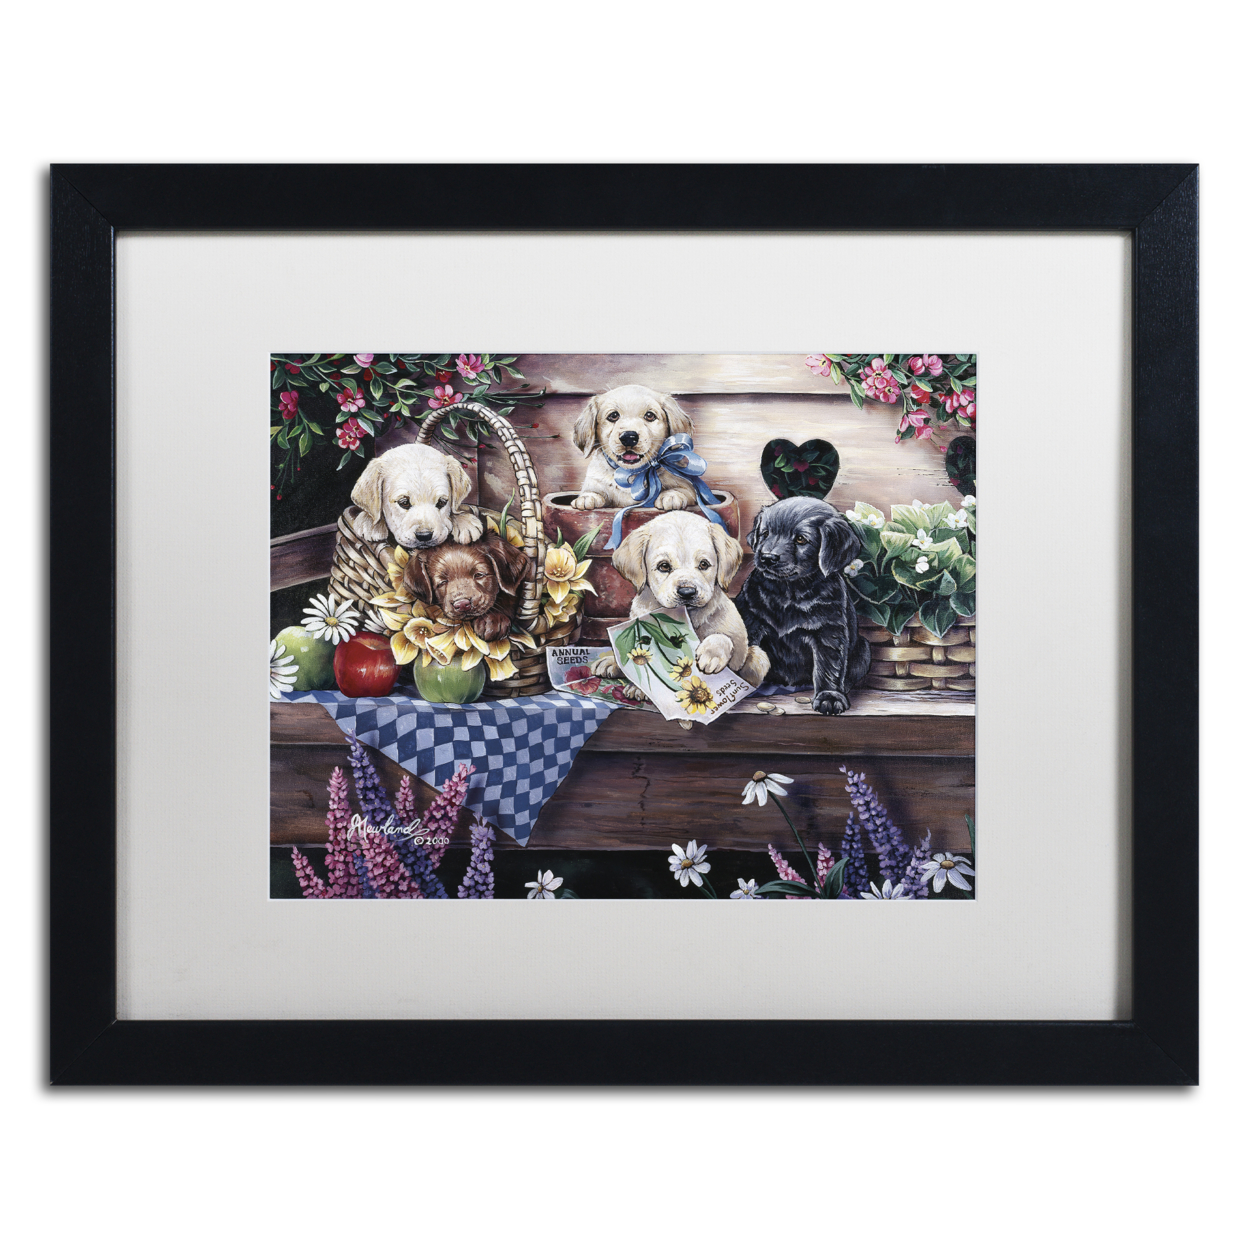 Jenny Newland 'Five Puppies' Black Wooden Framed Art 18 X 22 Inches